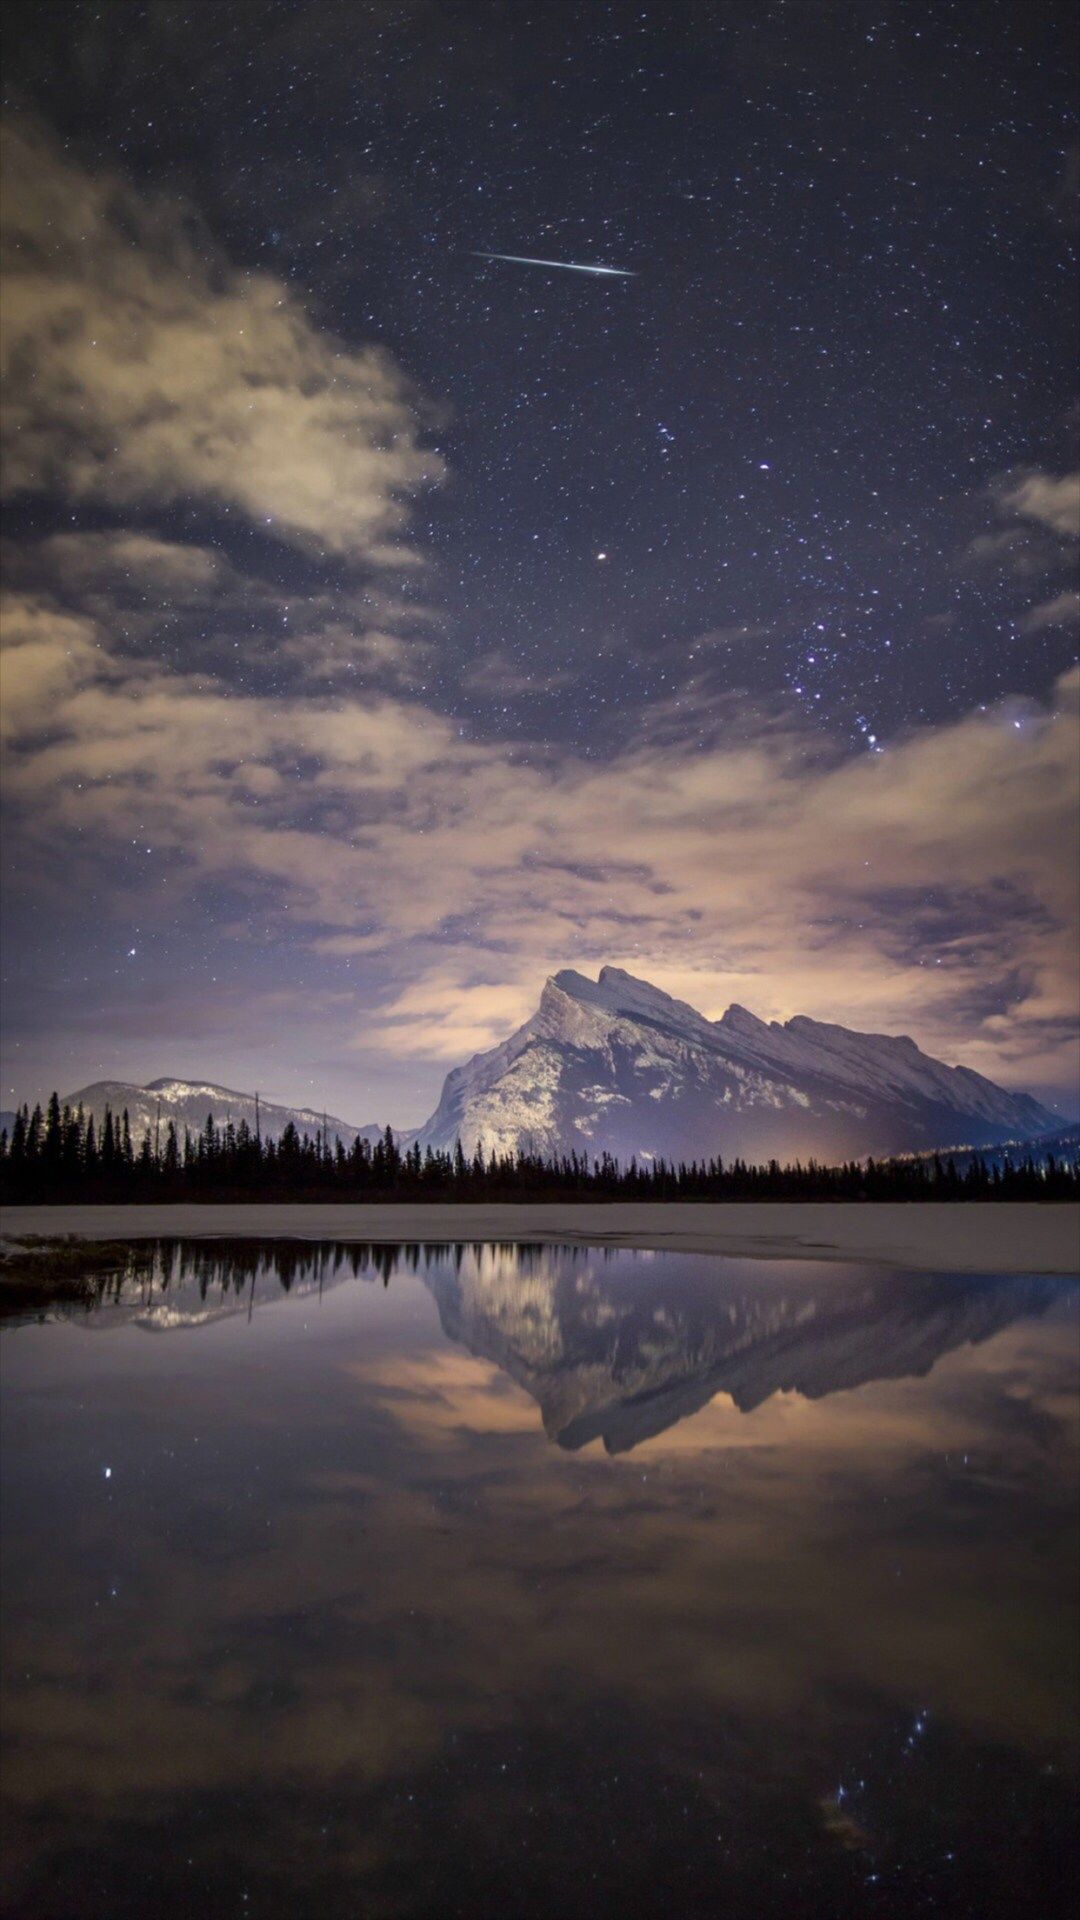 Night Mountain Iphone Wallpapers